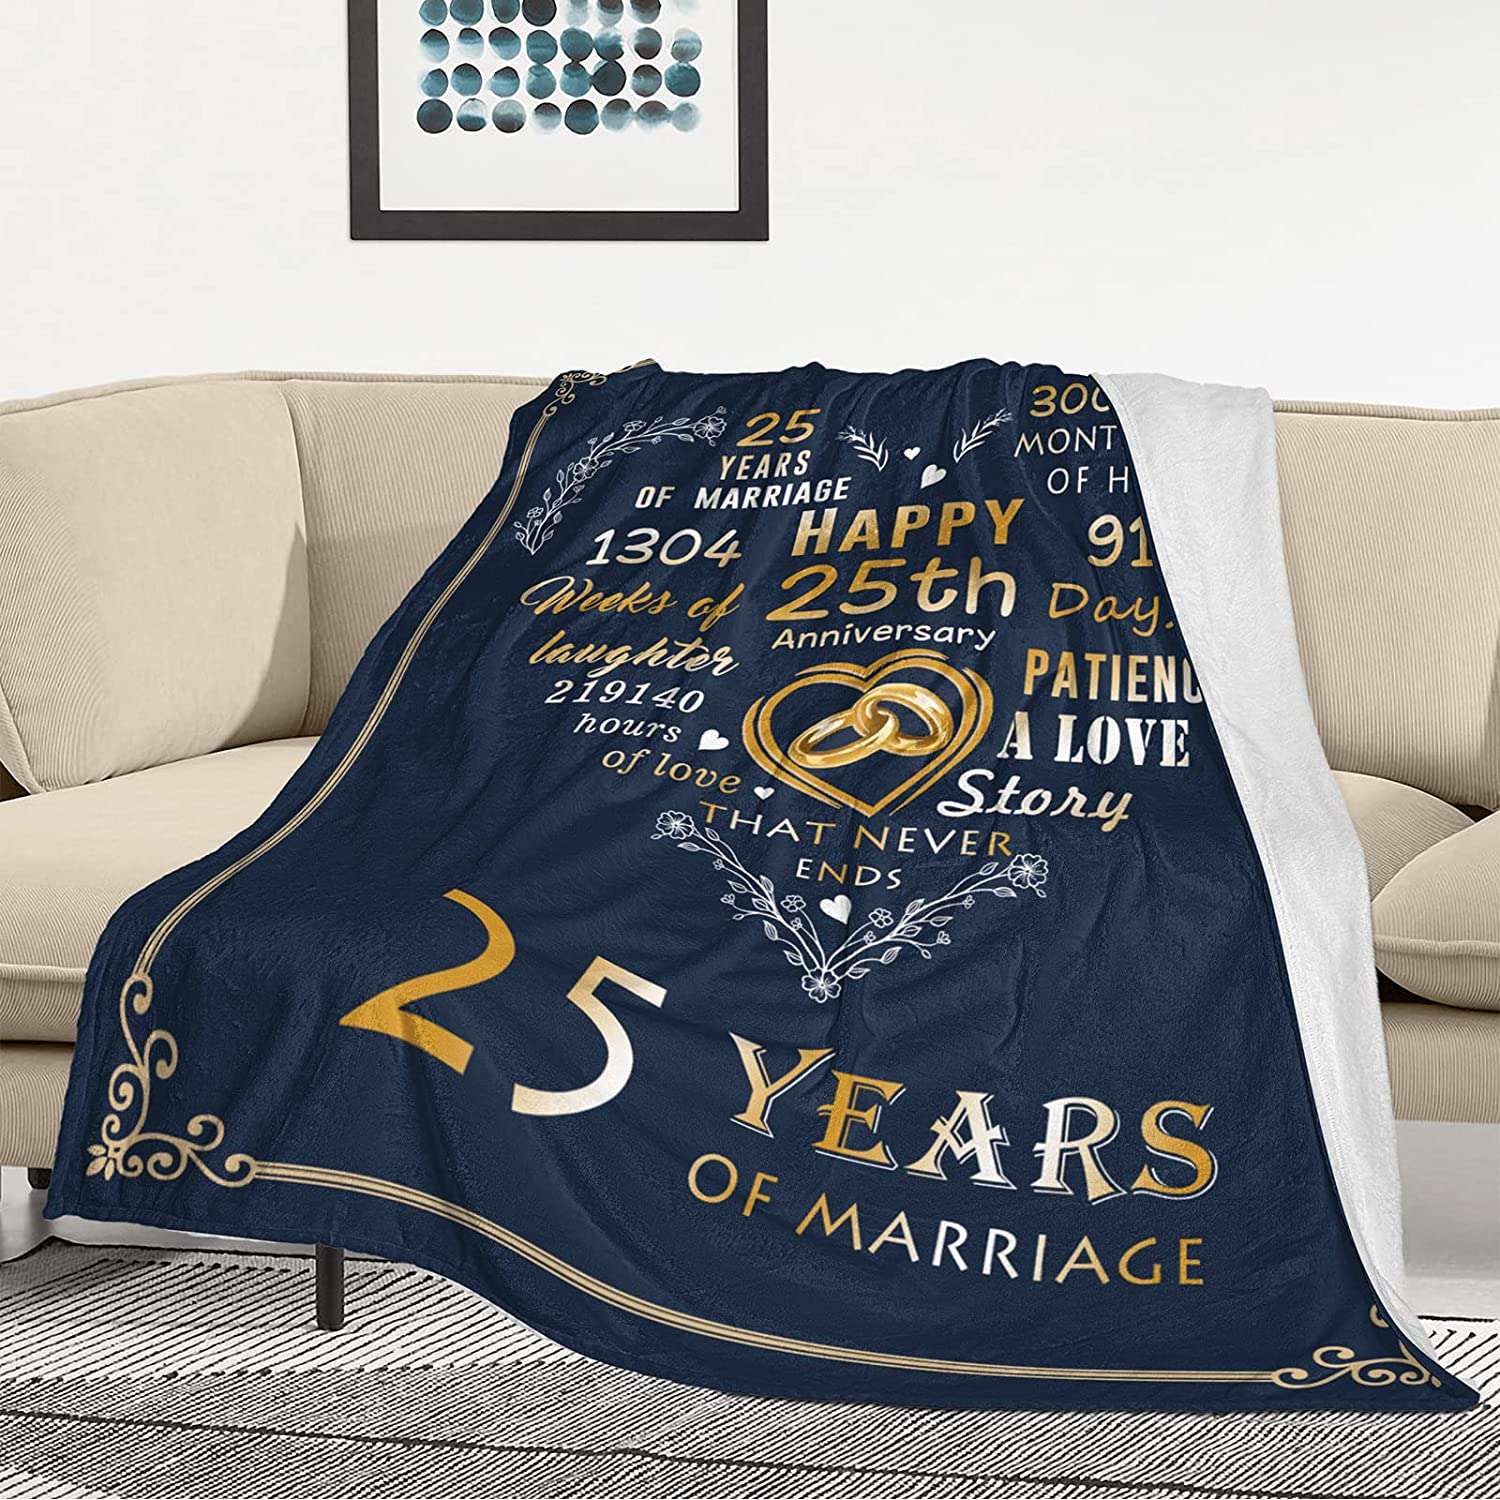 25th Silver Wedding Anniversary Couple Gifts Love That Never Ending Blanket